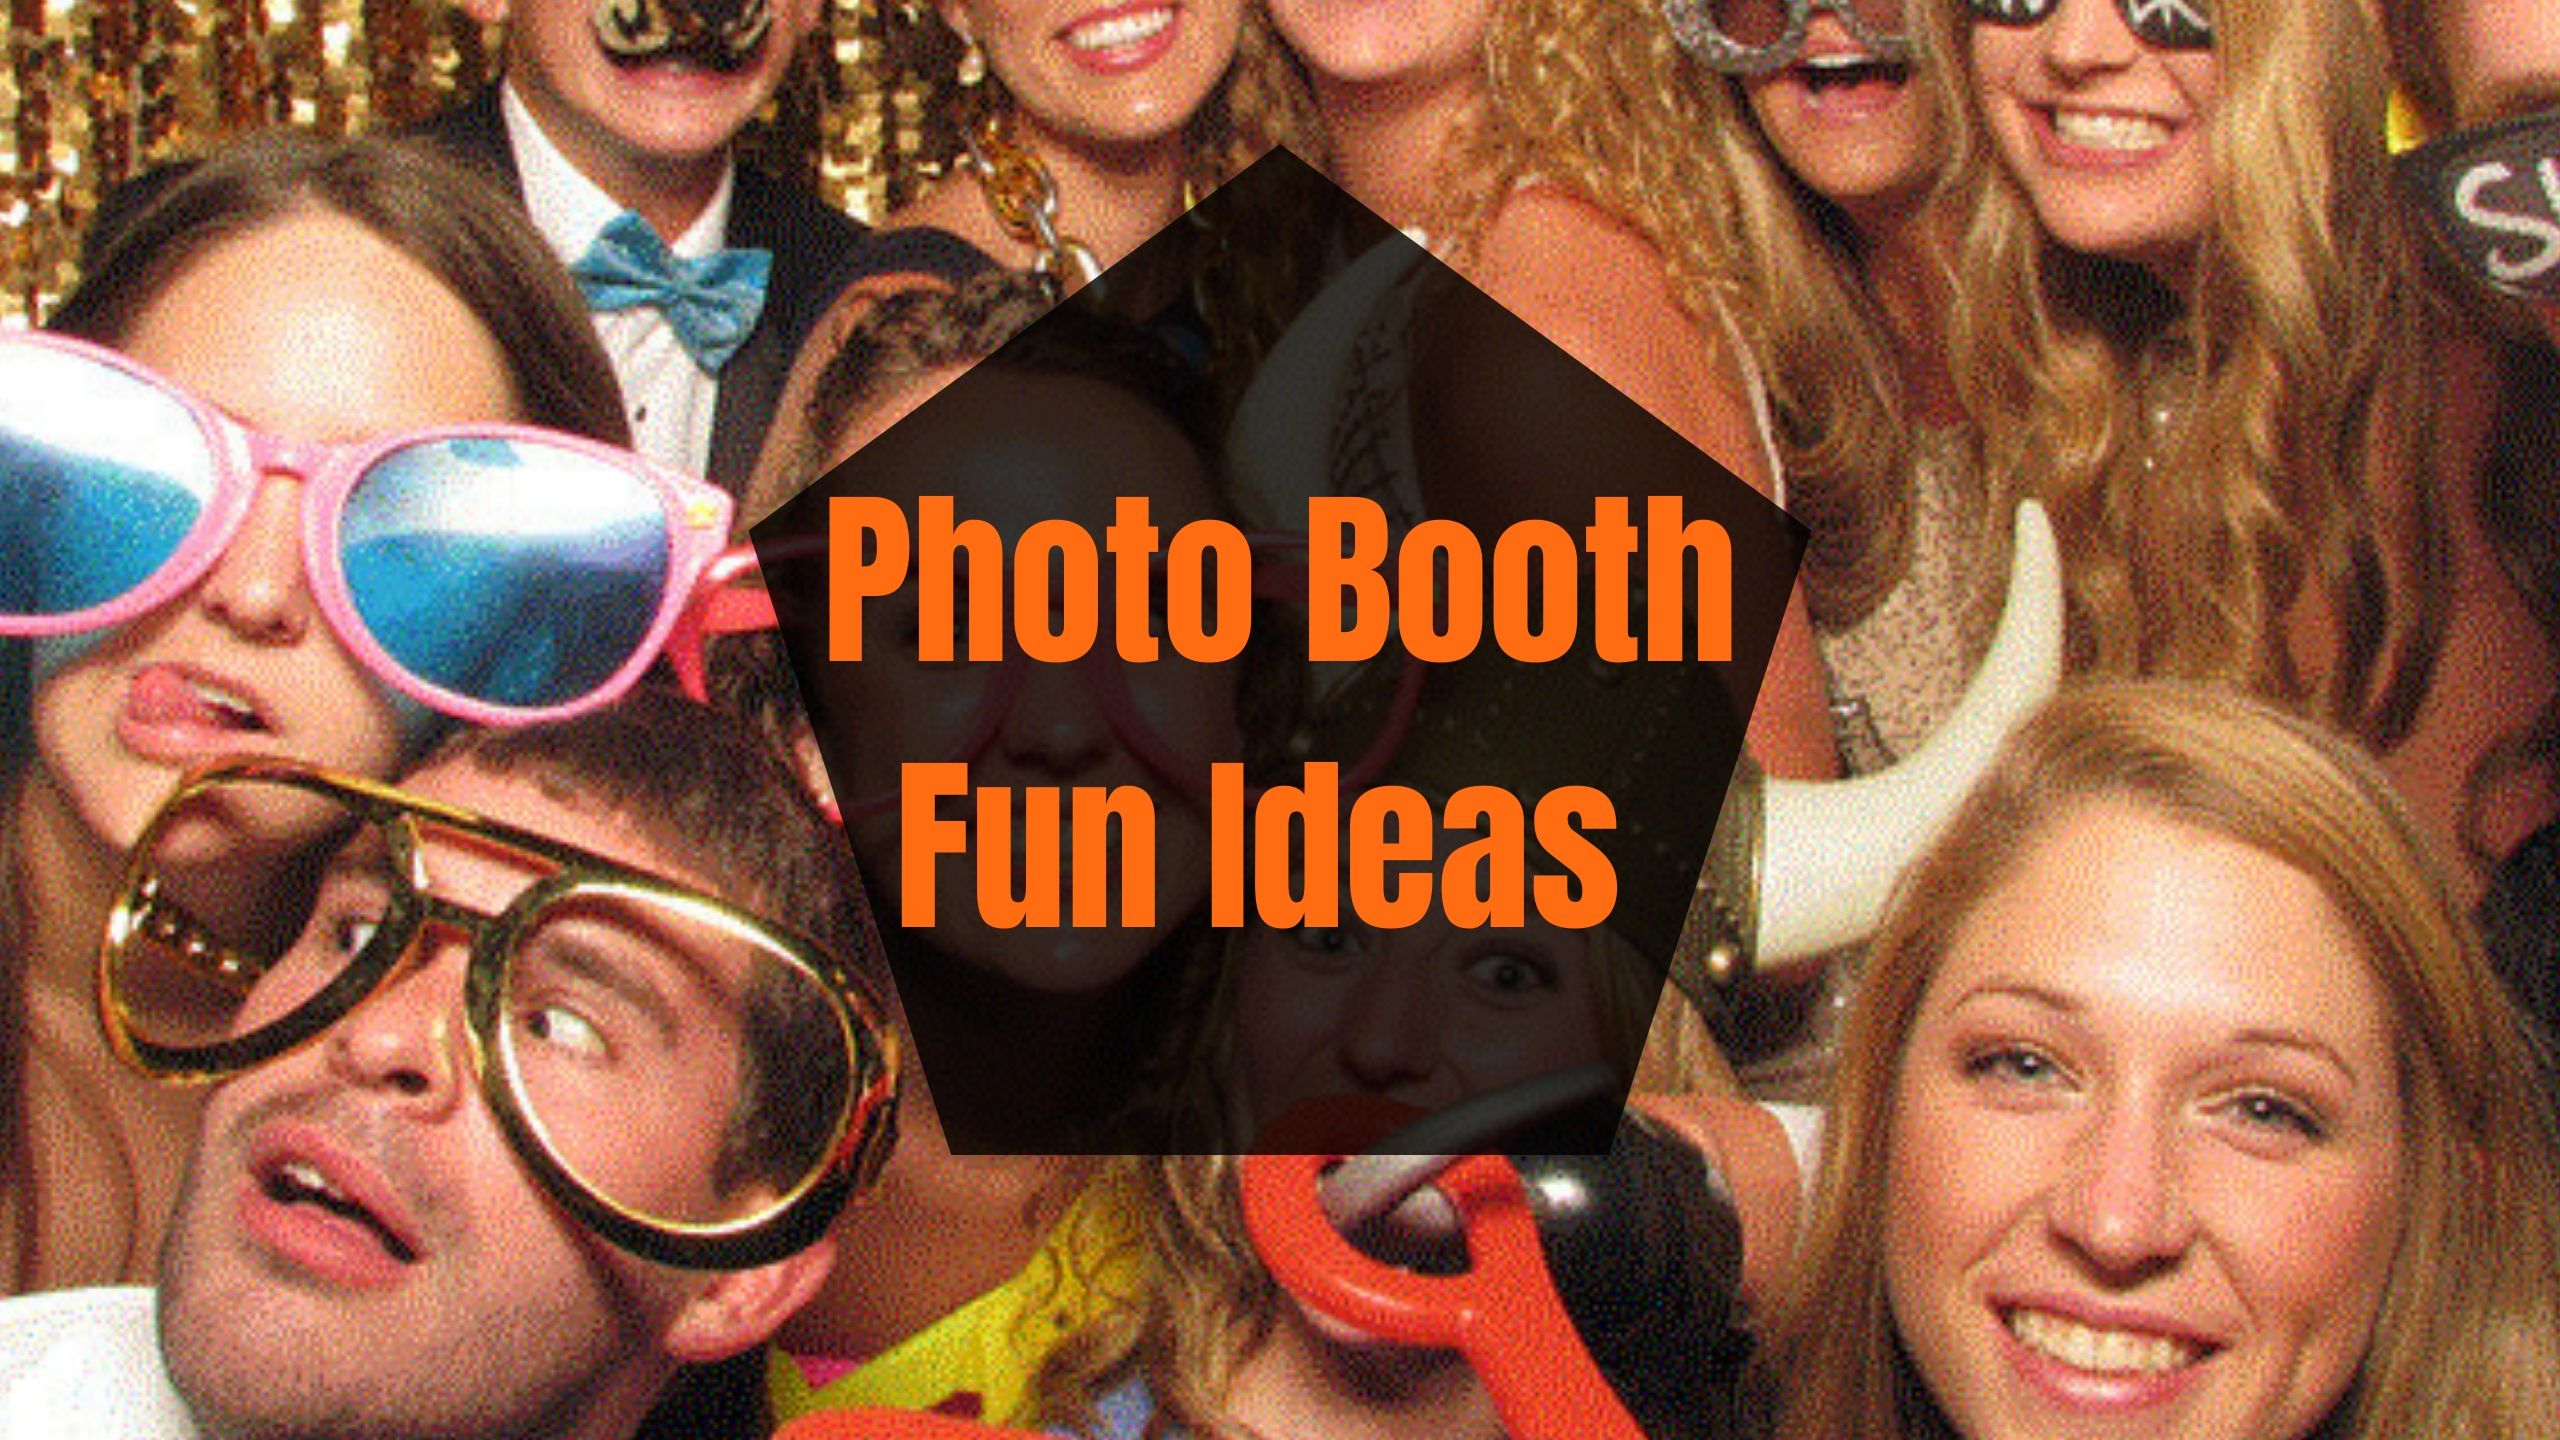 Photo Booth Fun Ideas for Weddings, Parties, & Events